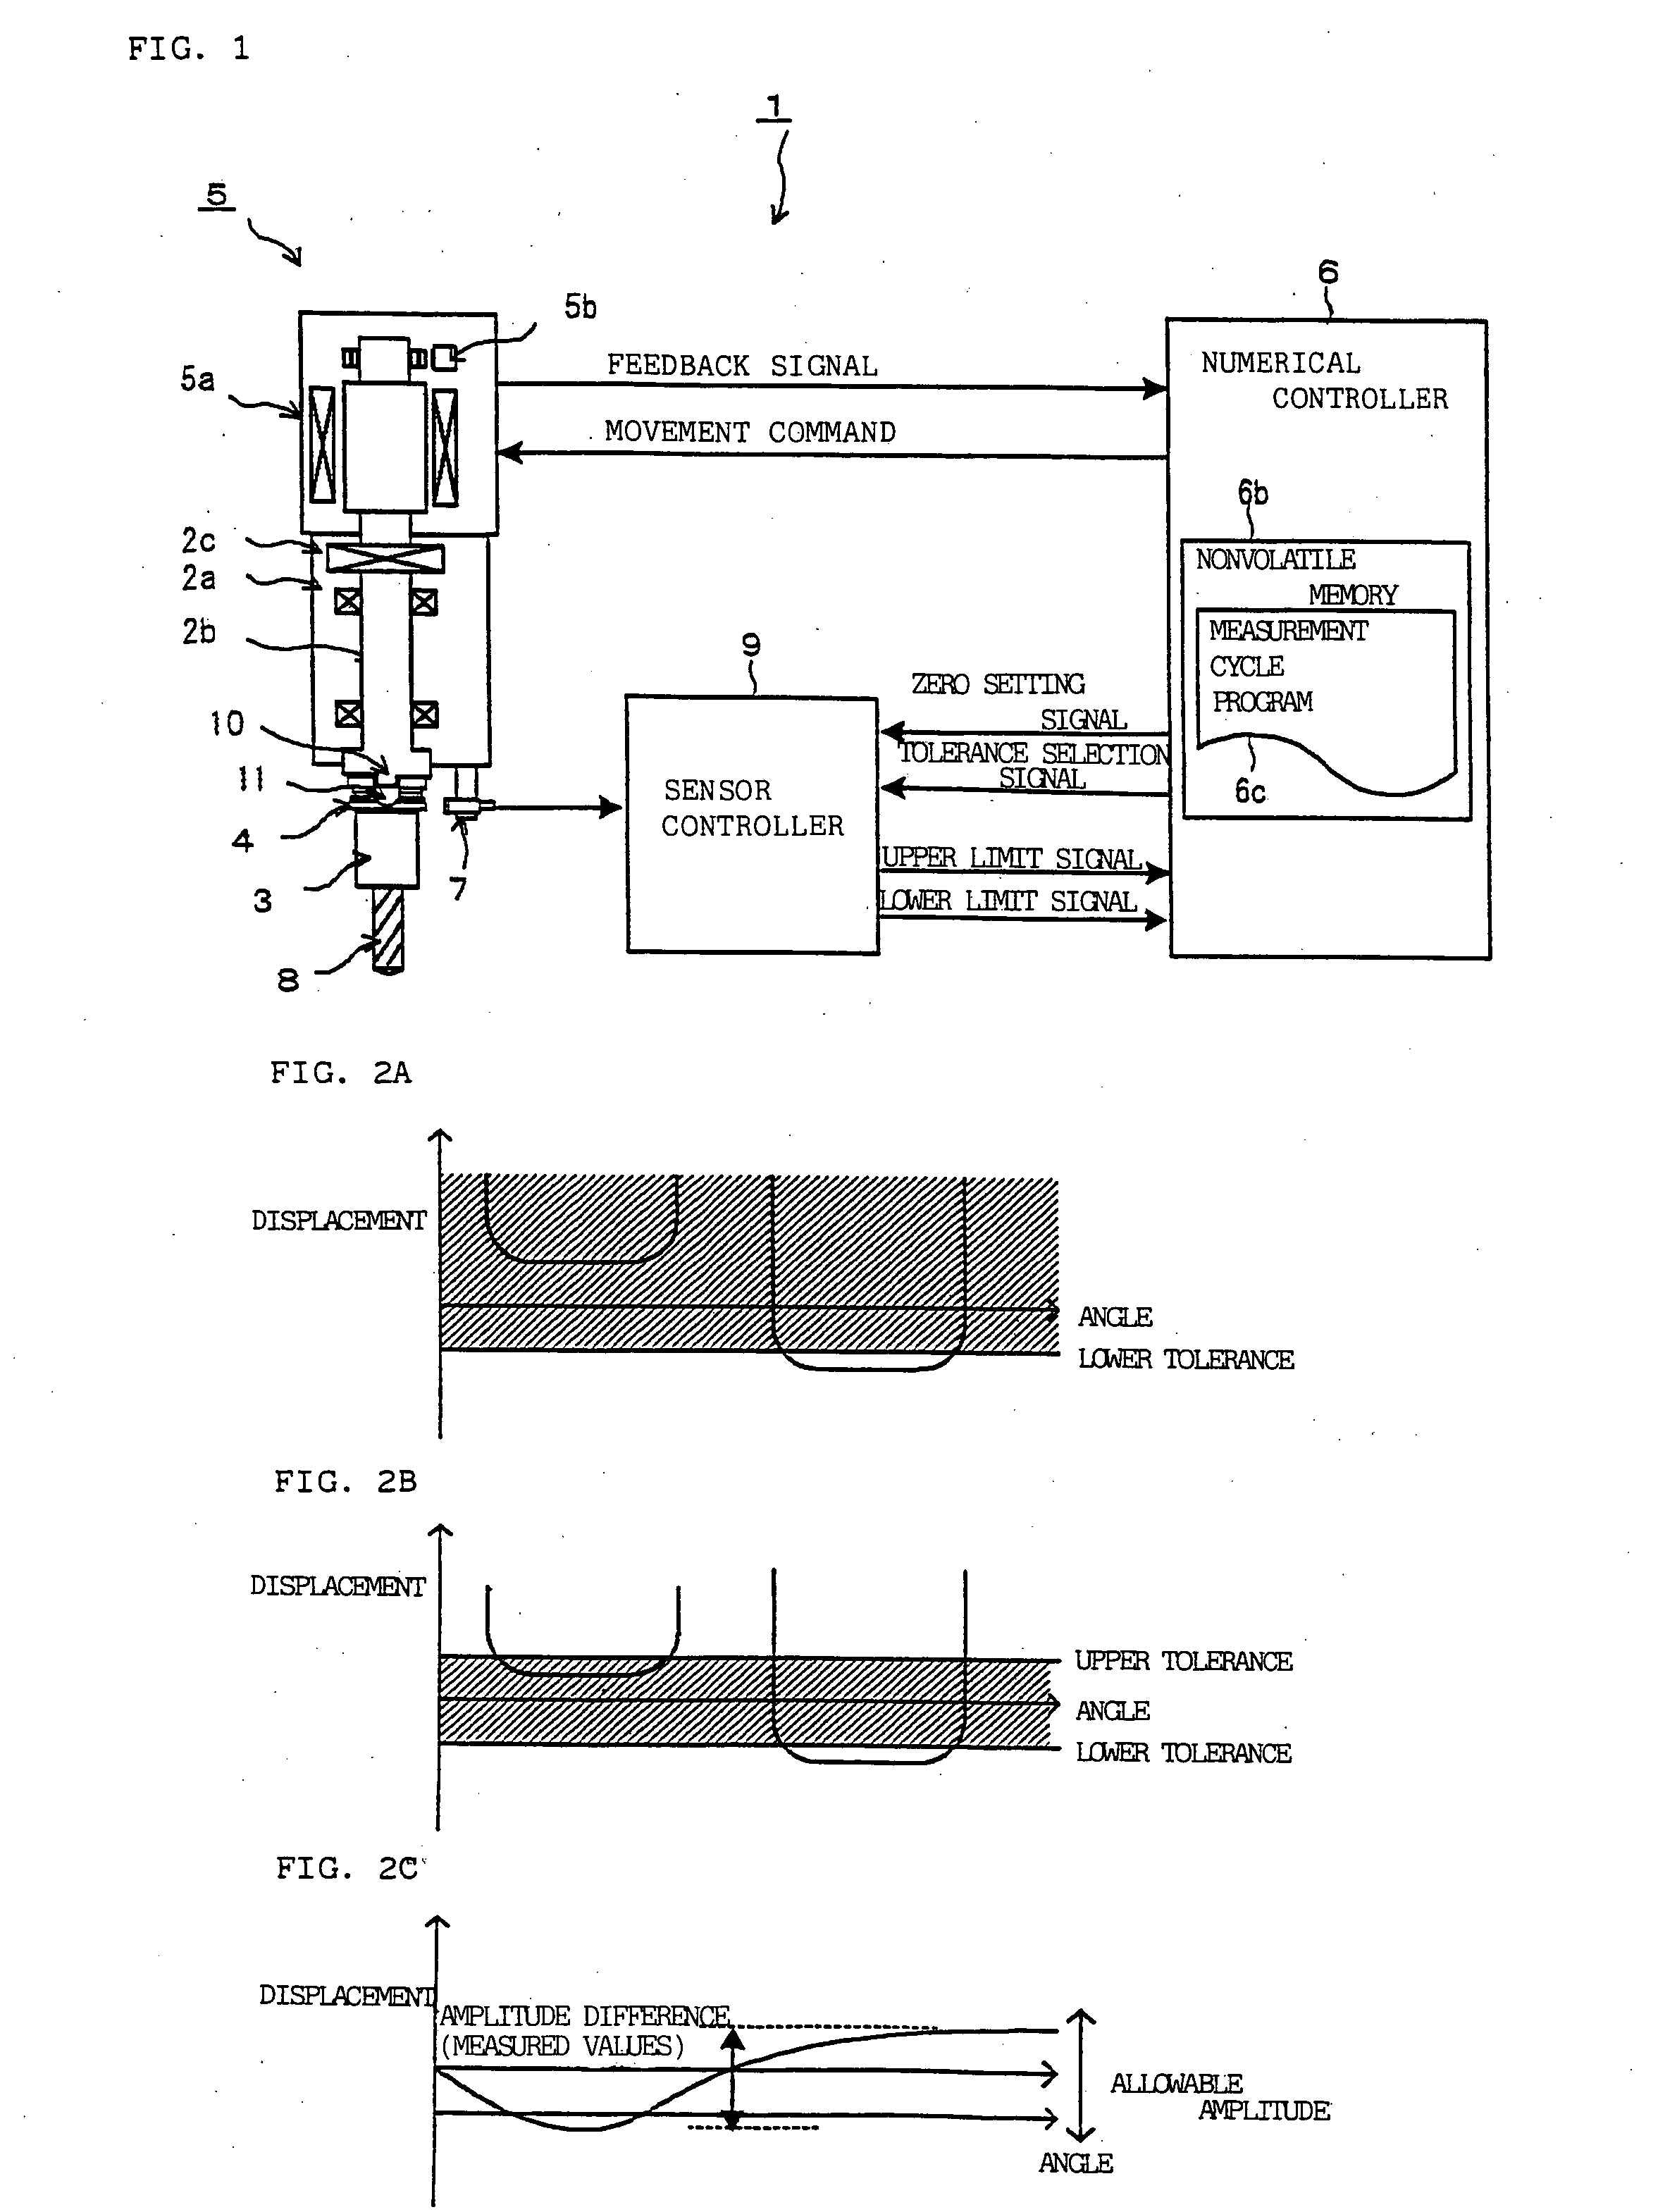 Numerically controlled machine tool